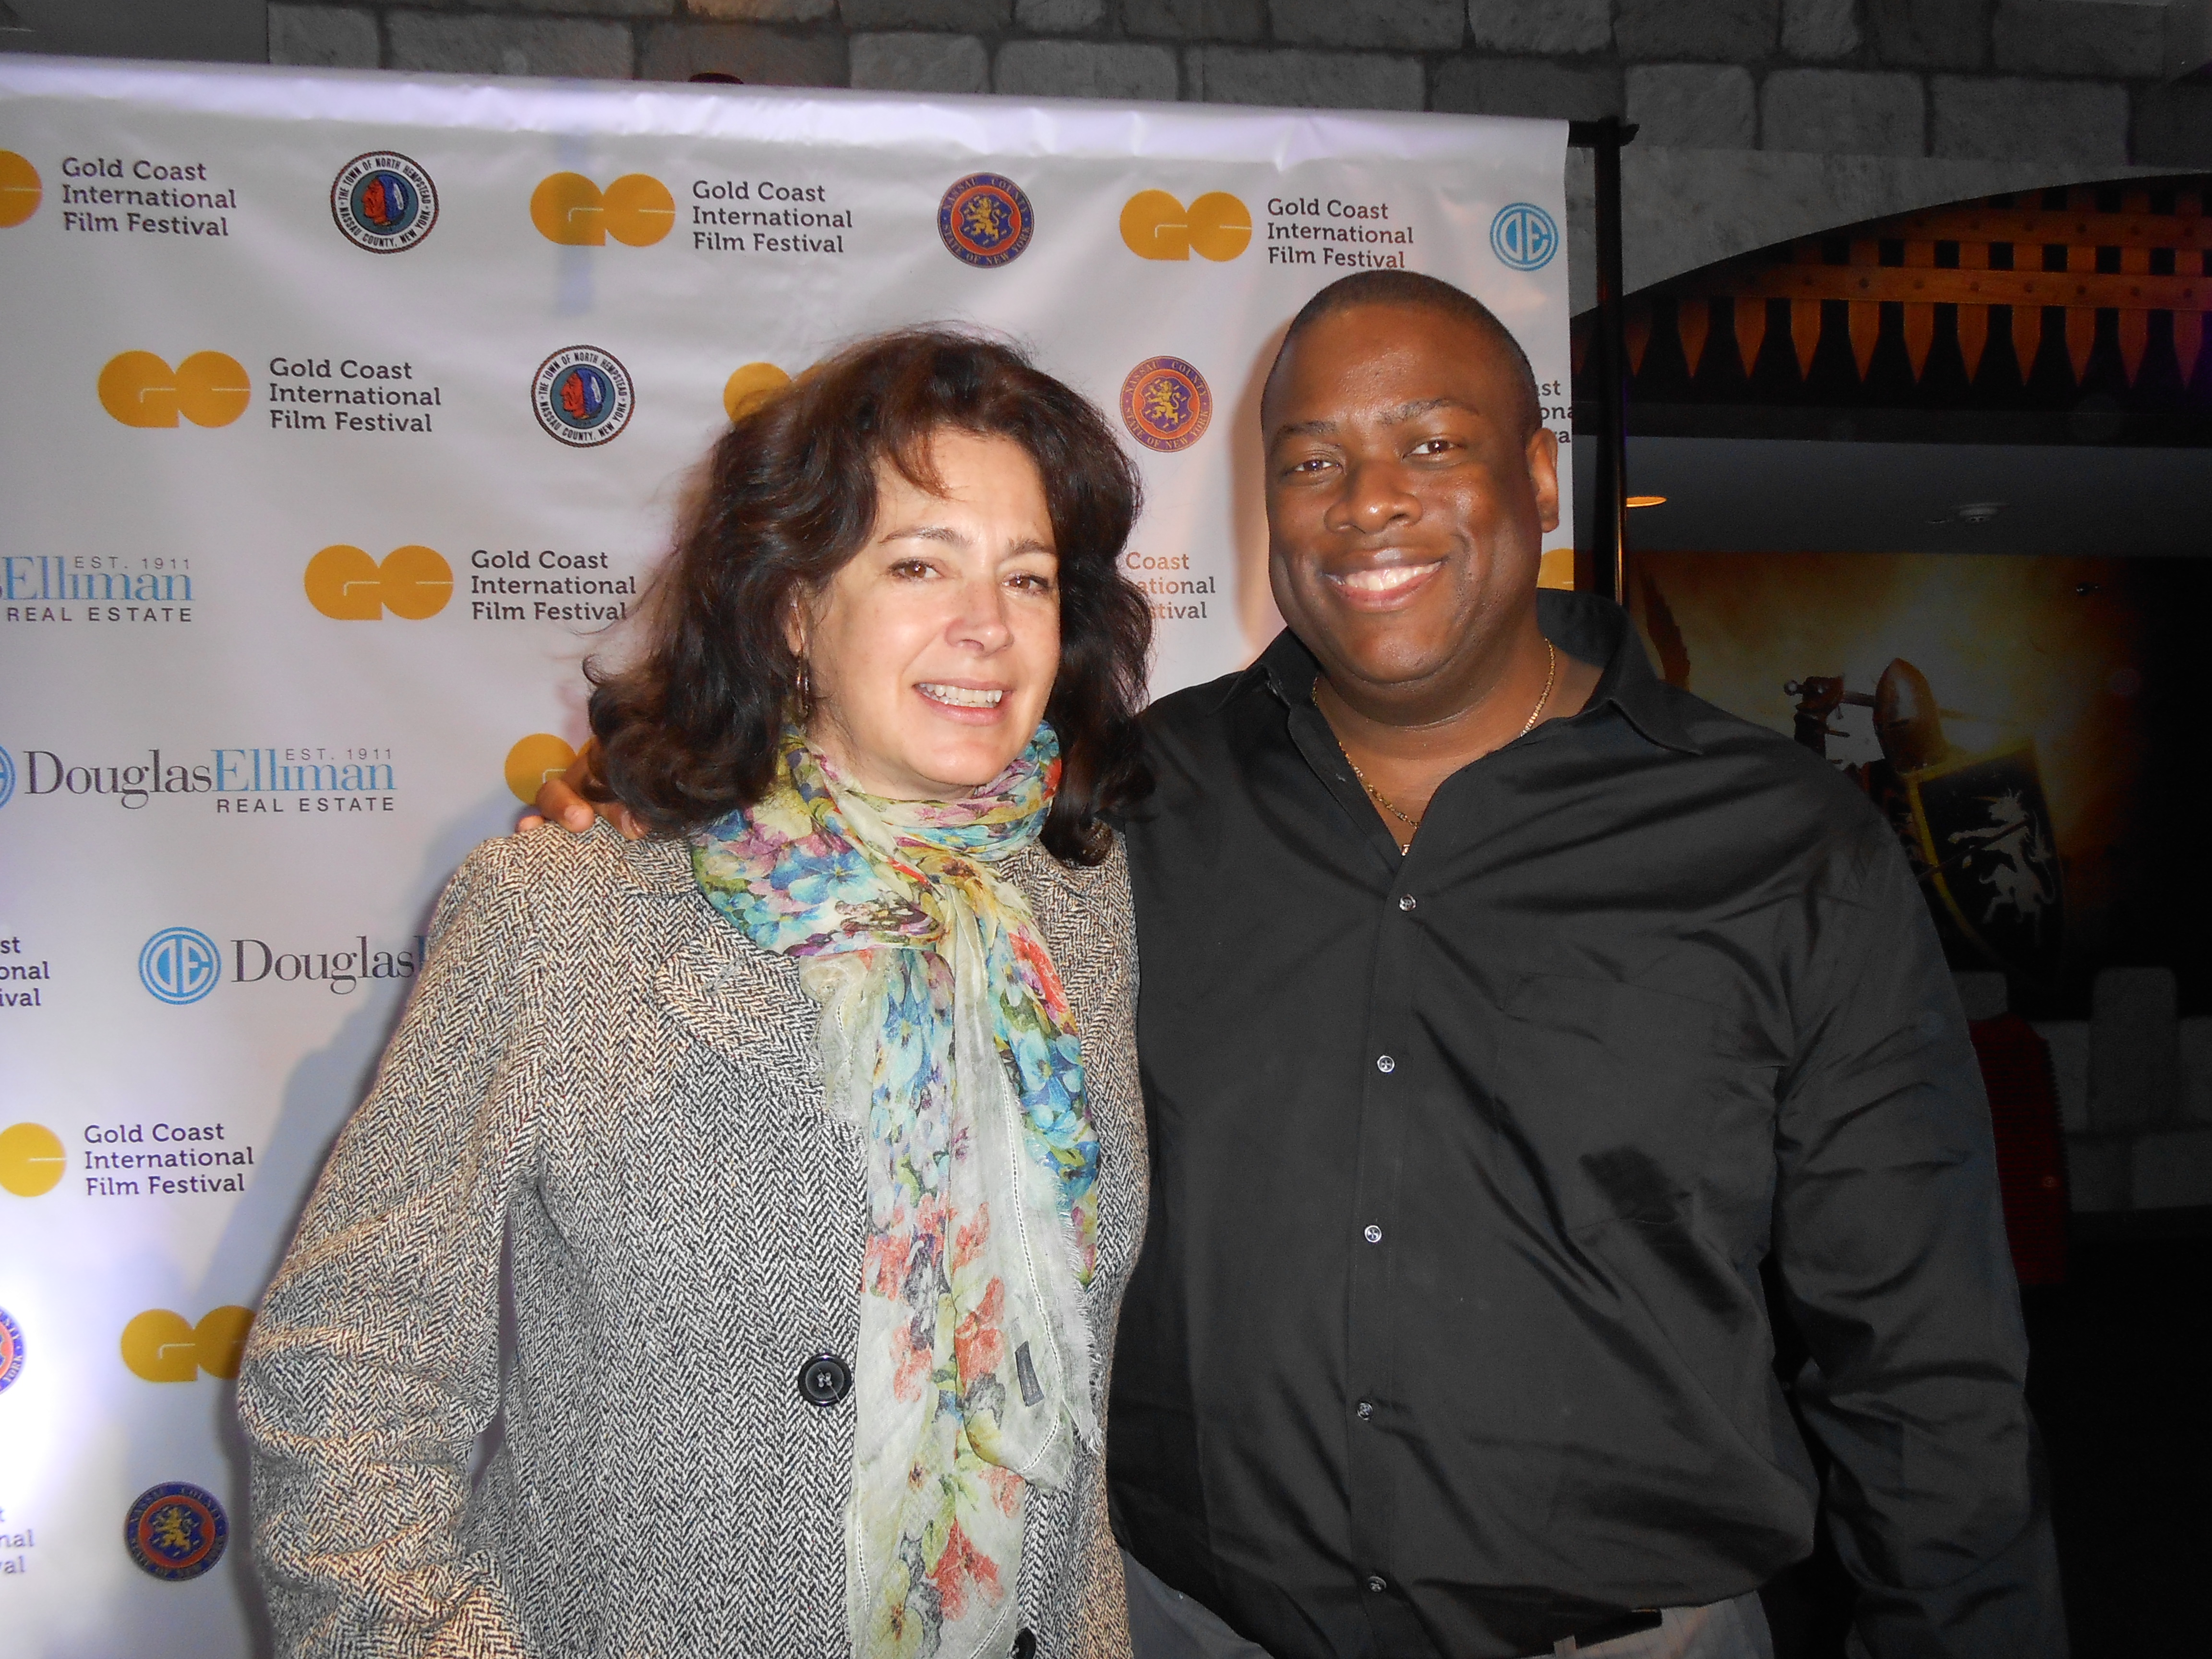 Sean Young and Michael J. Arbouet at the Gold Coast International Film Festival